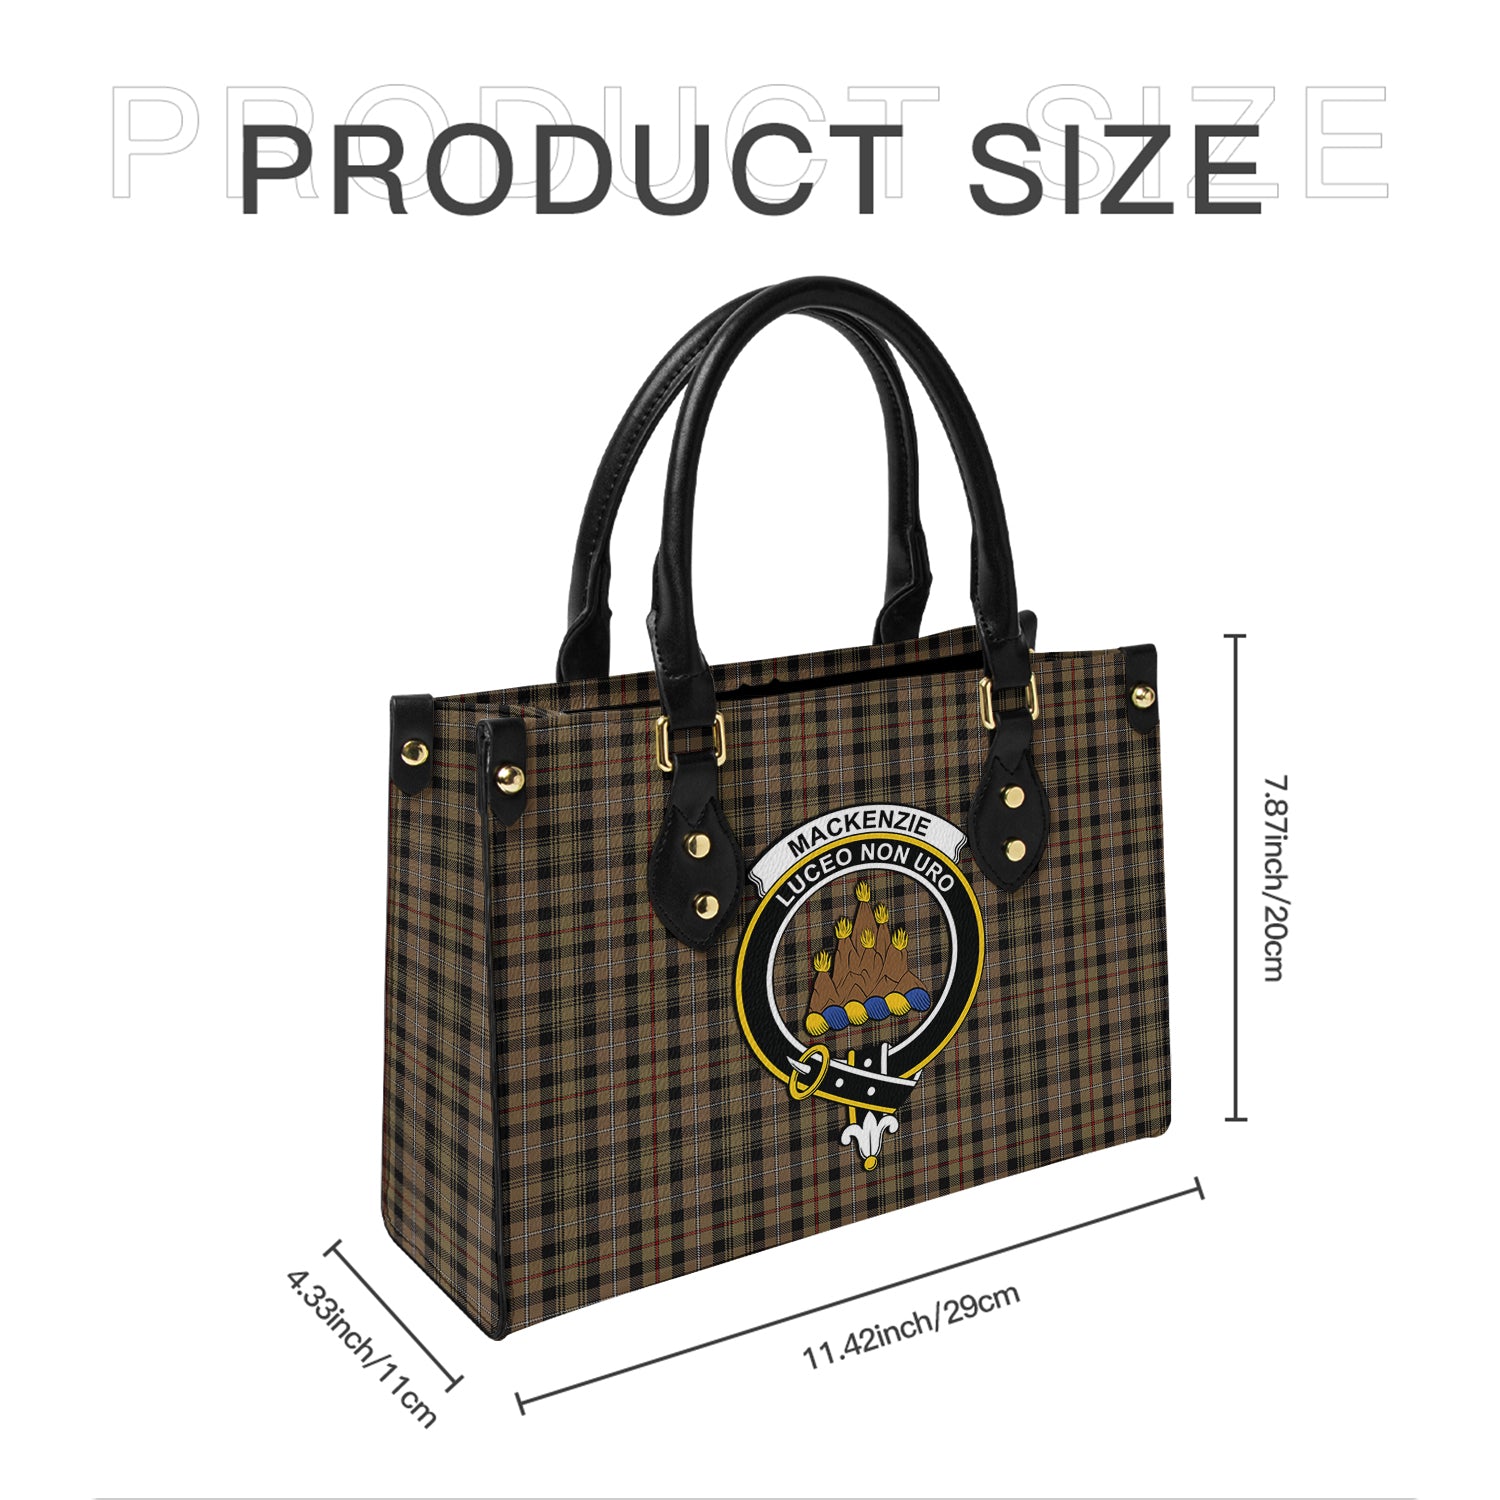 mackenzie-hunting-tartan-leather-bag-with-family-crest